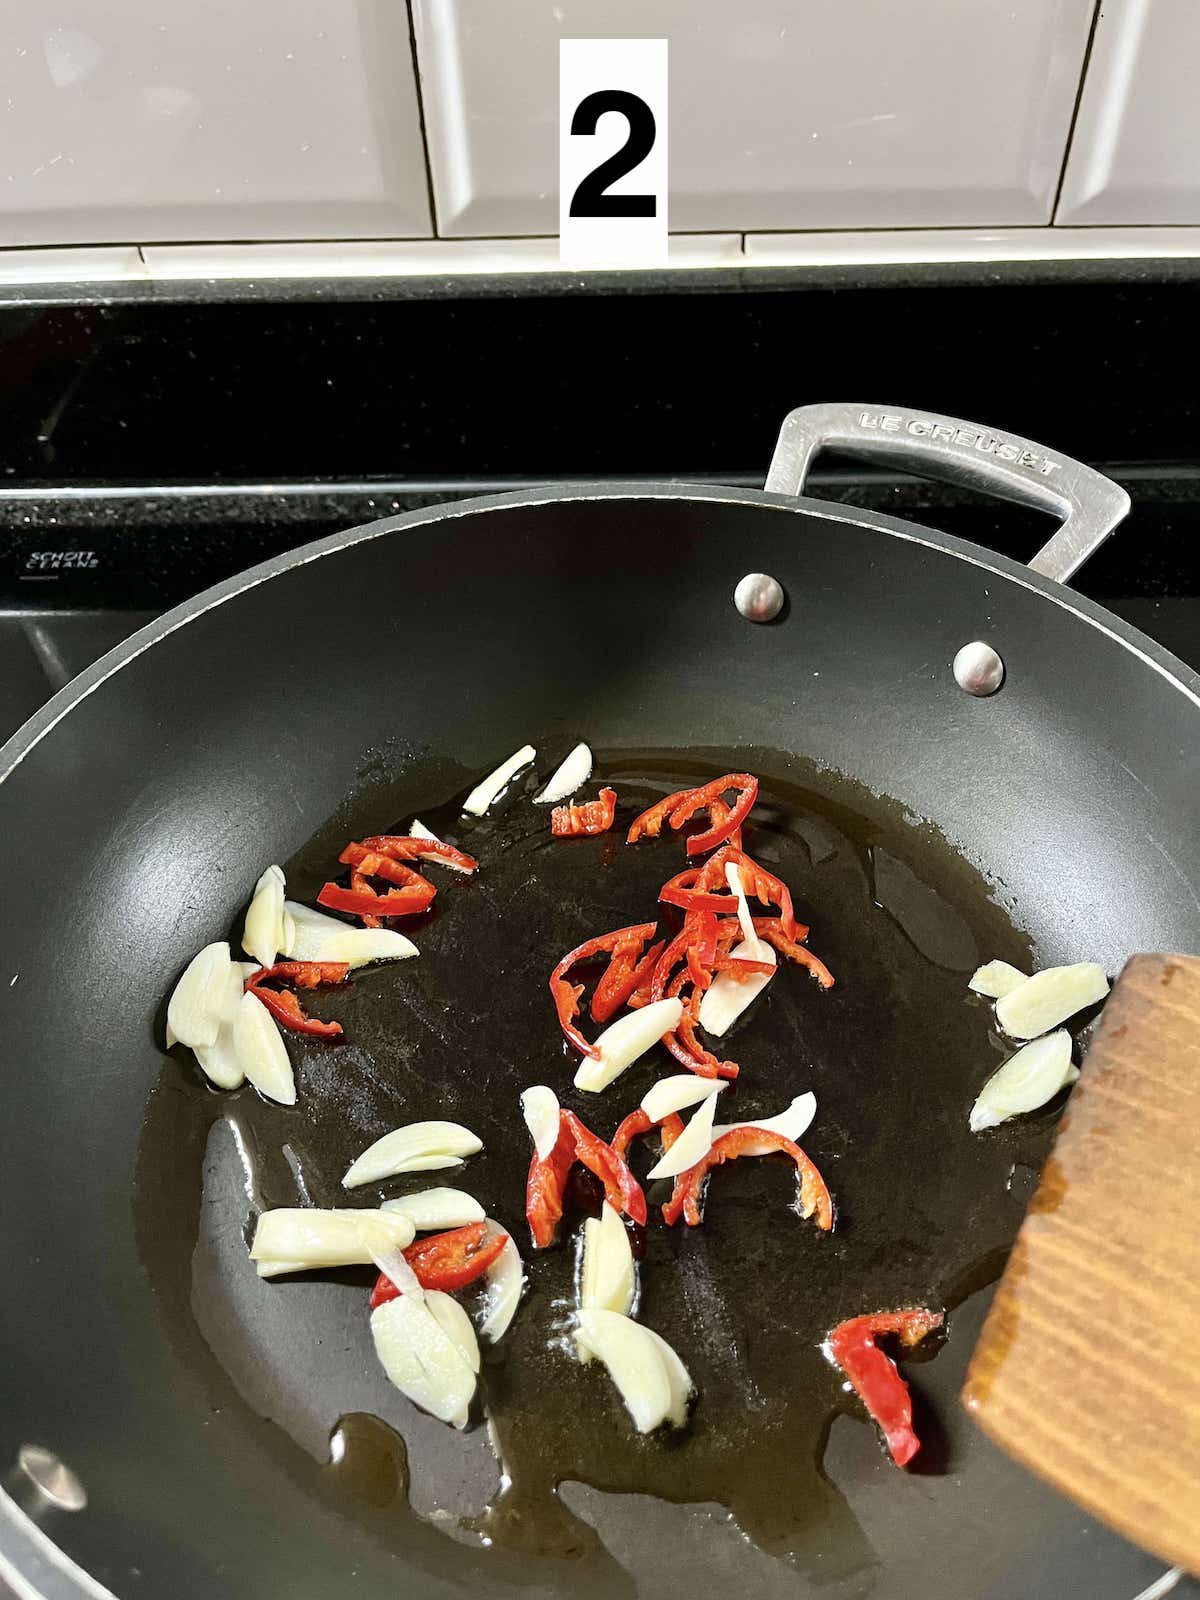 Stir-frying sliced garlic and red chilies.